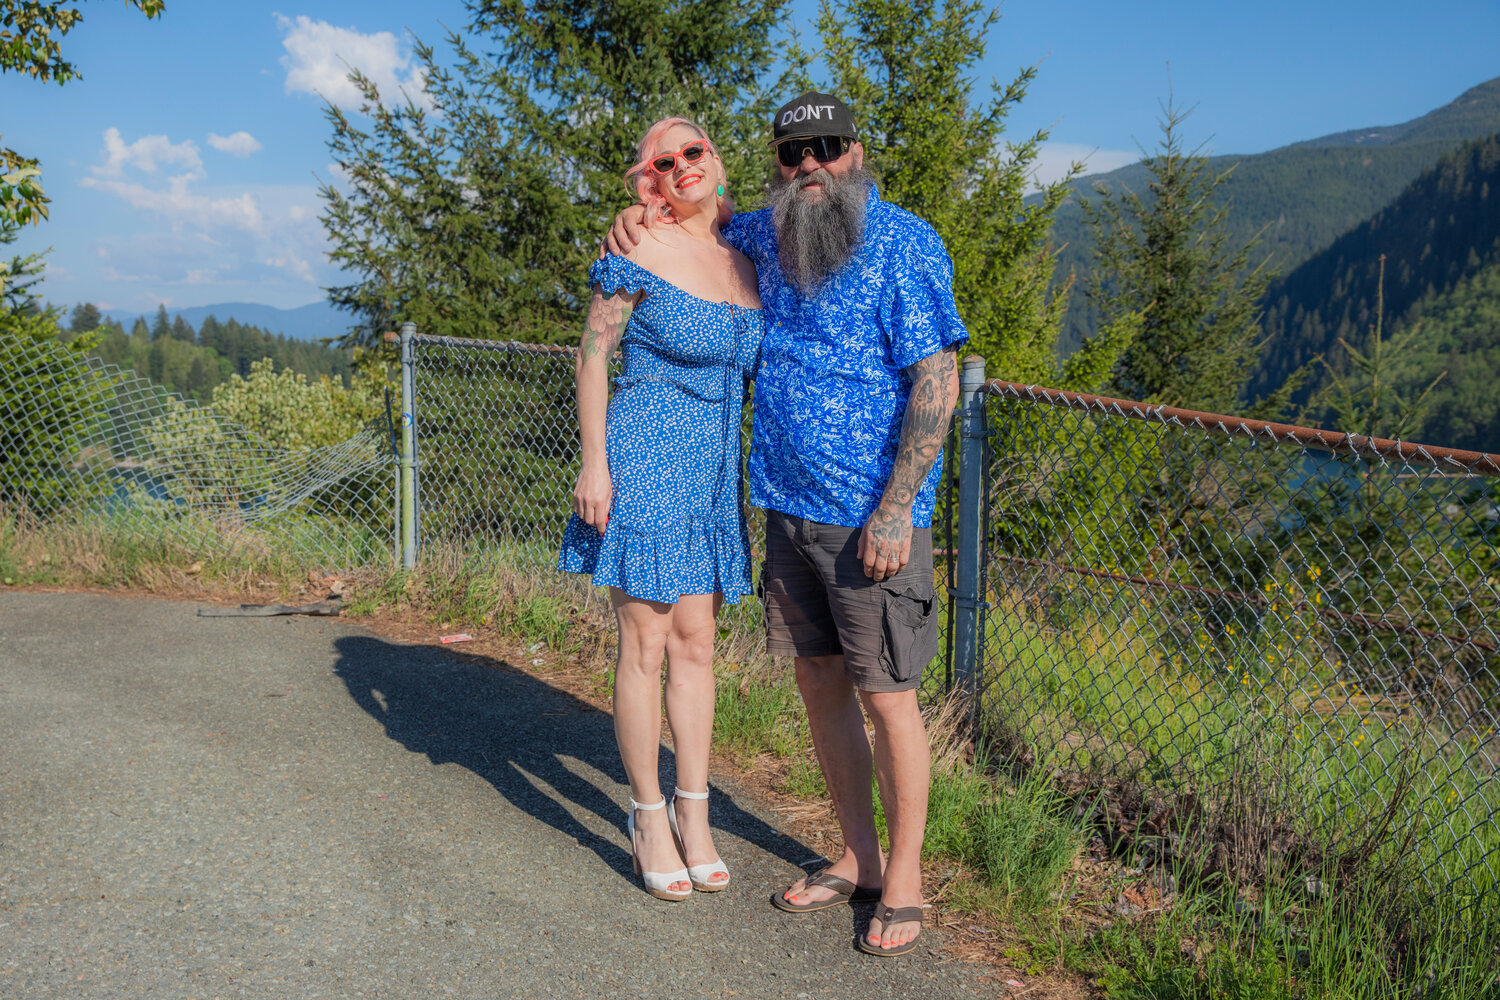 Jessica and Chris Rawlins, of Salmon Creek, smile for a photo while enjoying views around the Mount St. Helens National Volcanic Monument 43 years after the 1980 eruption.